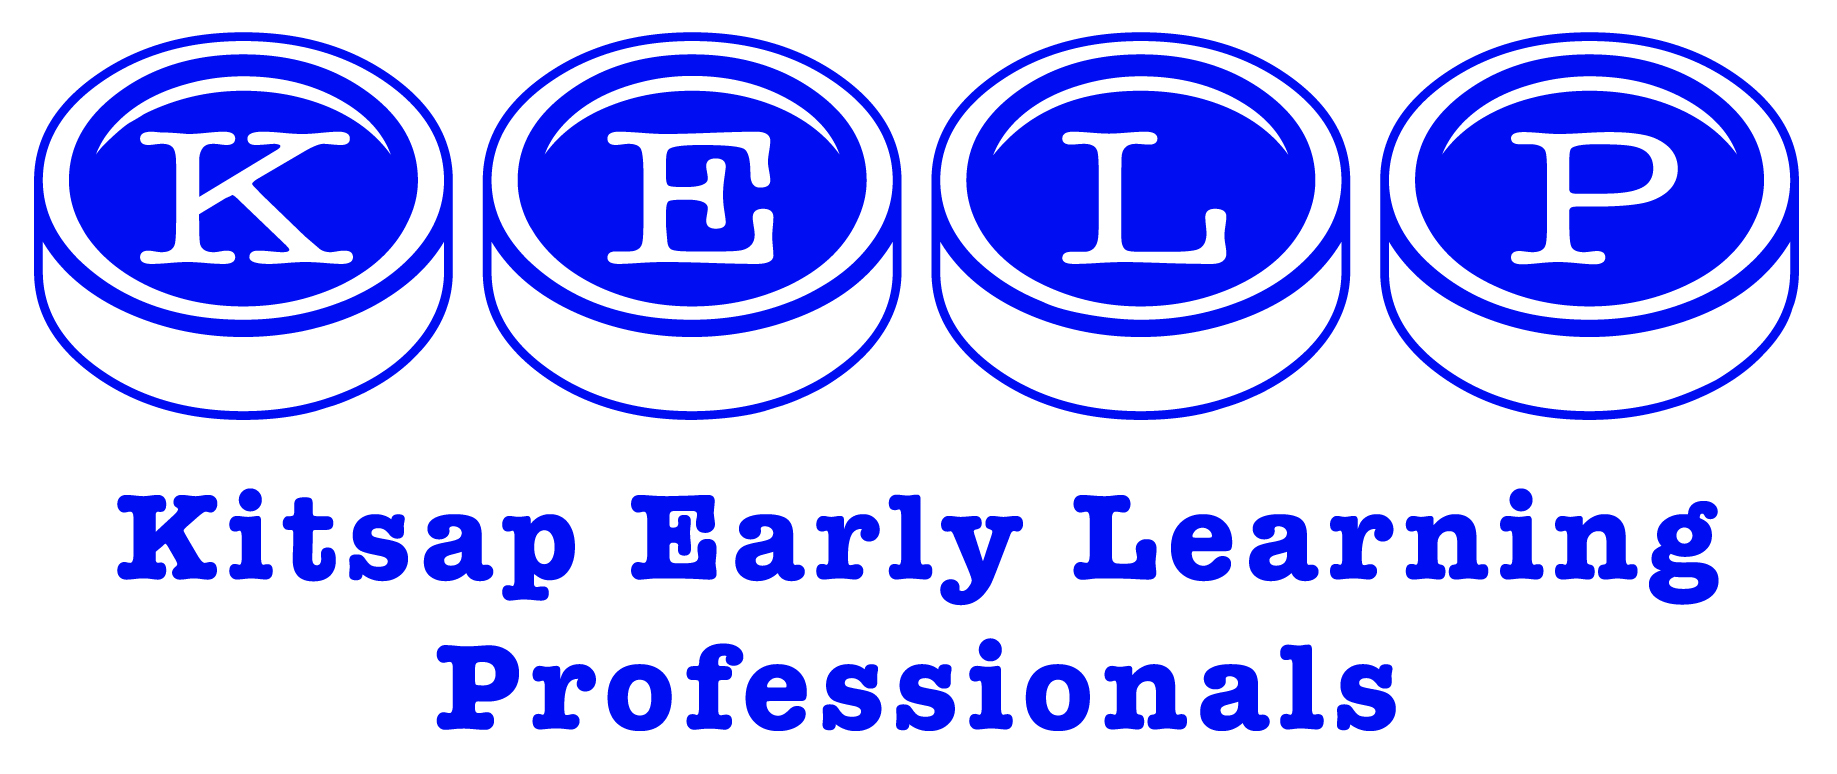 Kitsap Early Learning Professionals